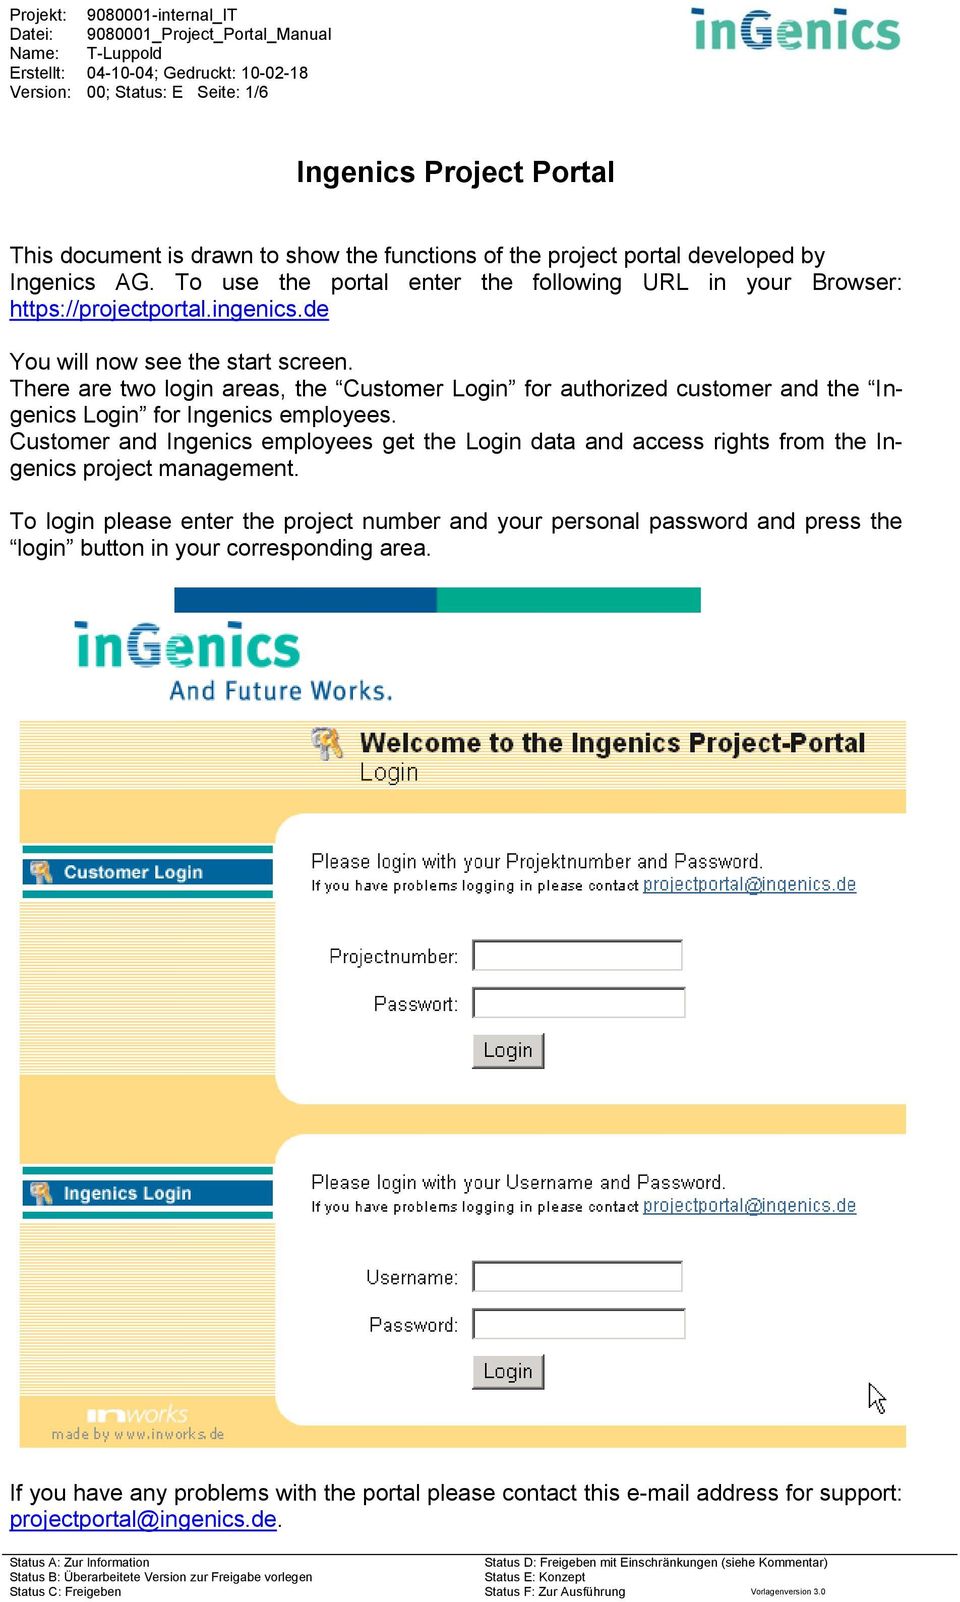 There are two login areas, the Customer Login for authorized customer and the Ingenics Login for Ingenics employees.